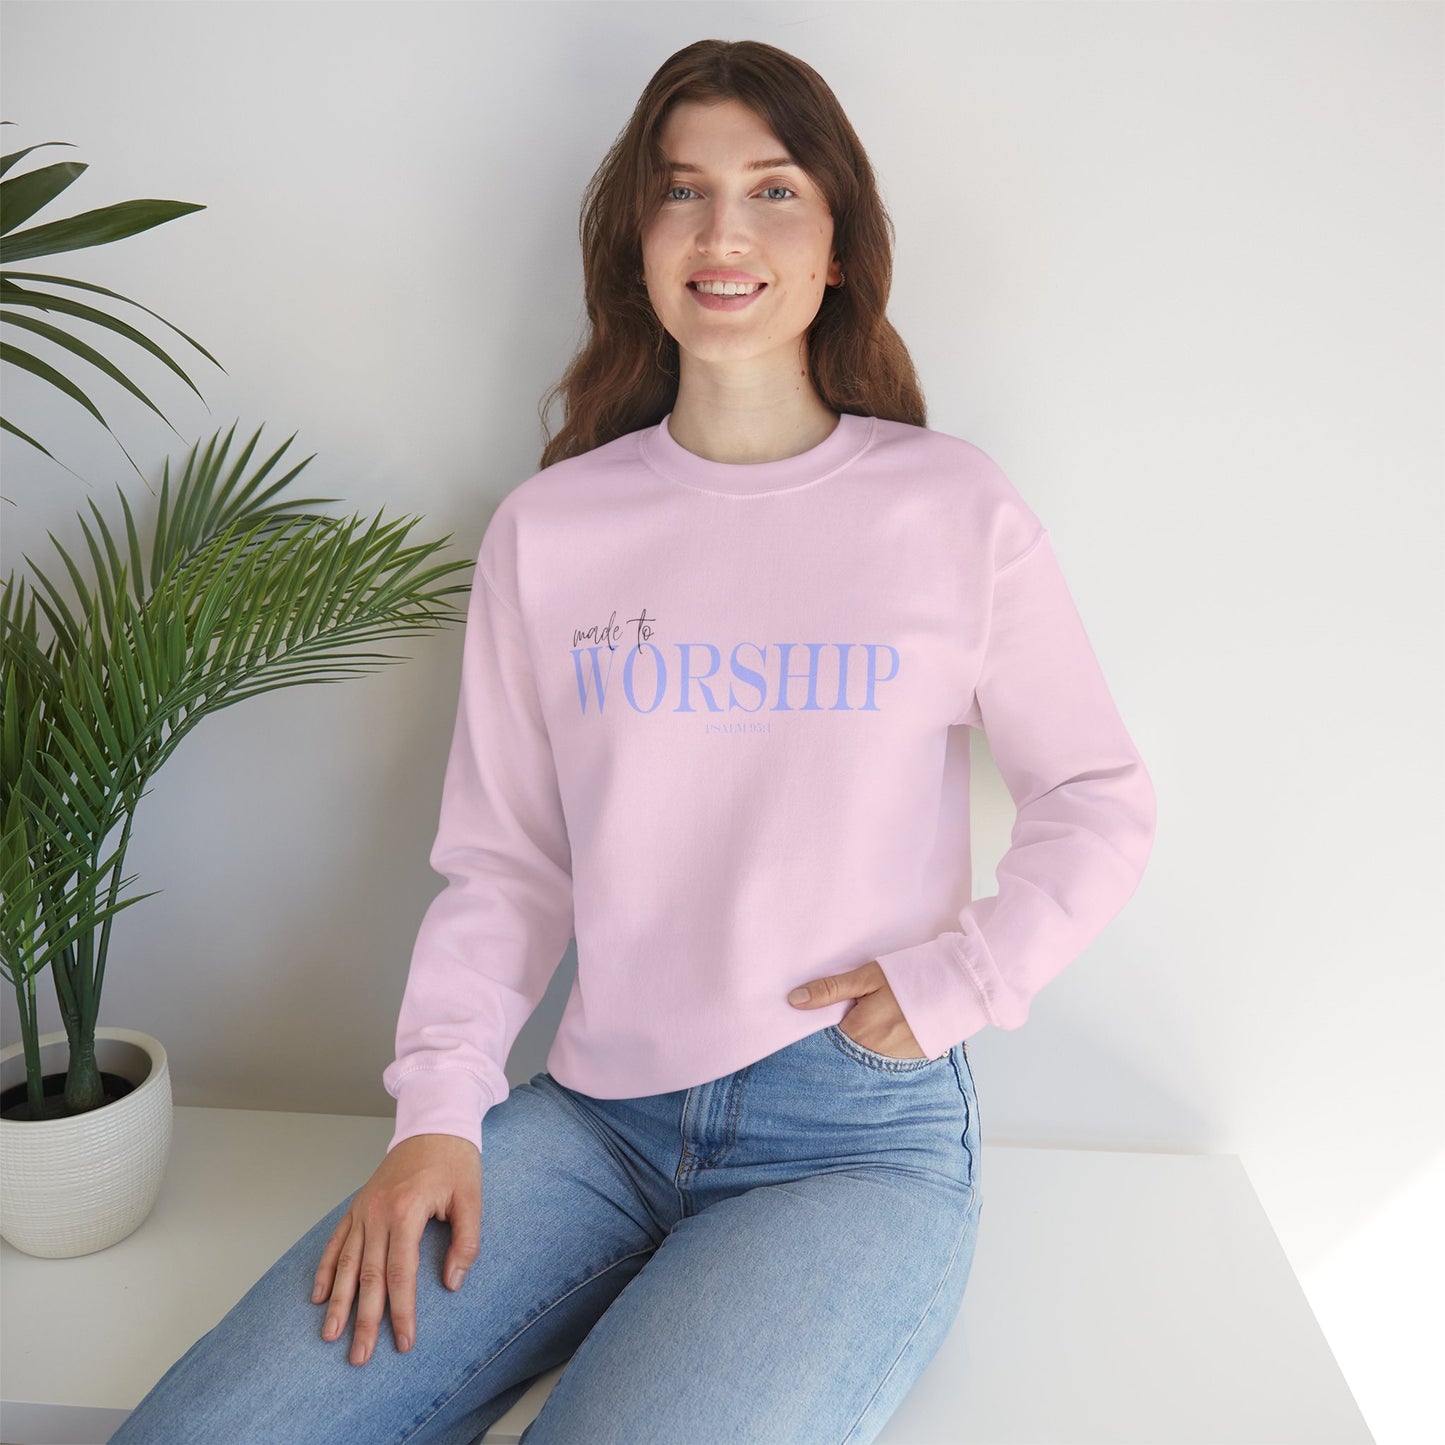 Scripture Crewneck For Women Psalm 95:1, Perfect For Religious Students, Teachers, Perfect Gift For Christian Faith, Catholic School Gift & Faithful Individuals